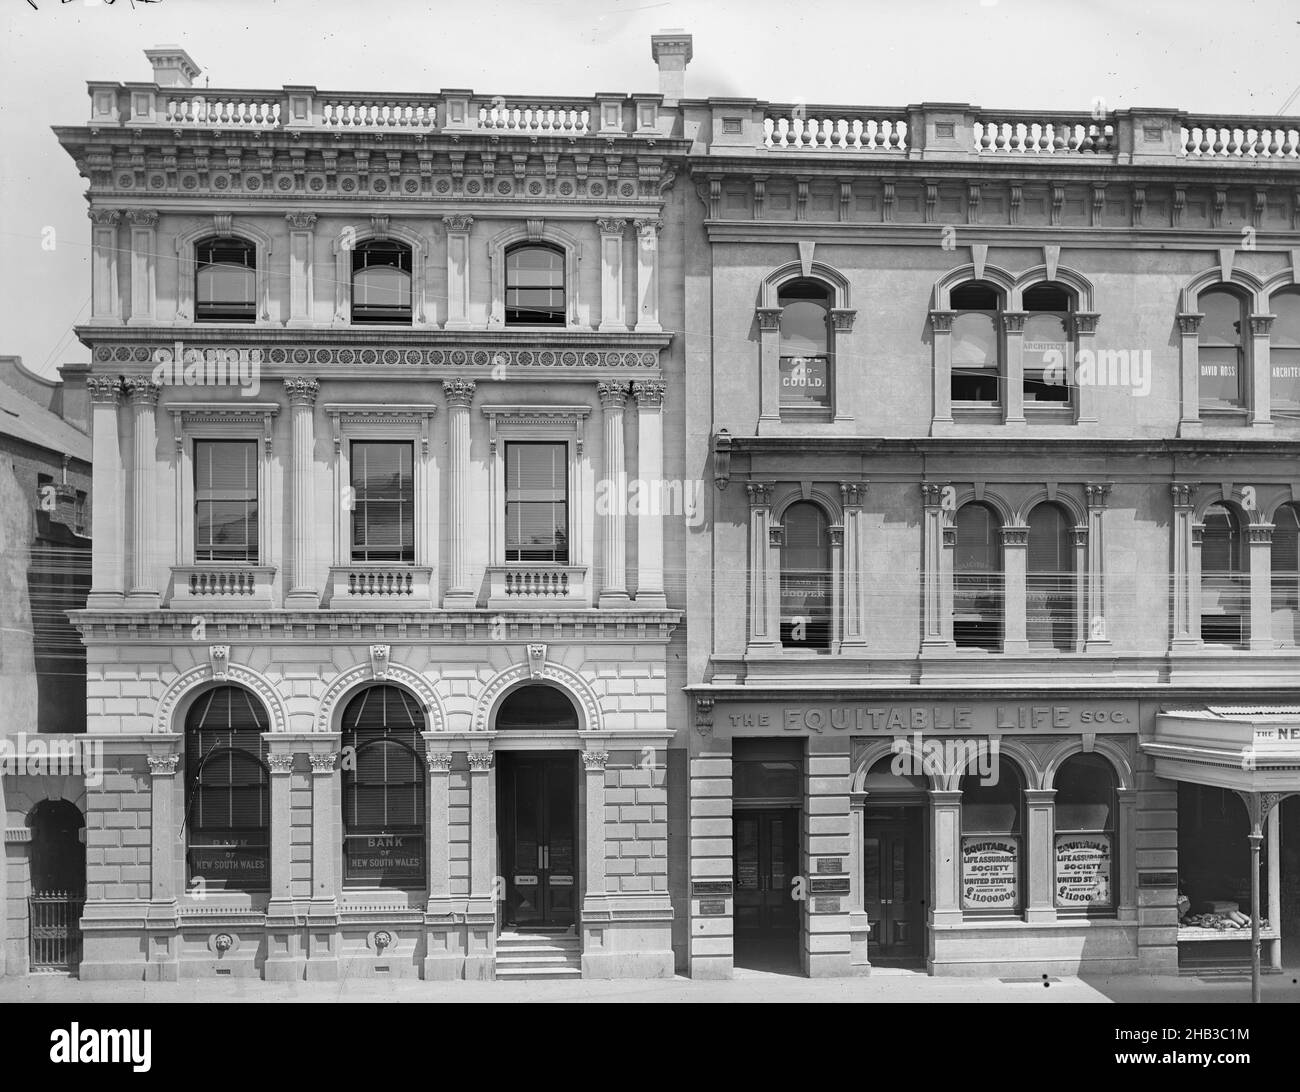 [Bank, Auckland], Burton Brothers studio, photography studio, Dunedin, gelatin dry plate process, Bank of New South Wales and Equitable Life Society Premises Stock Photo